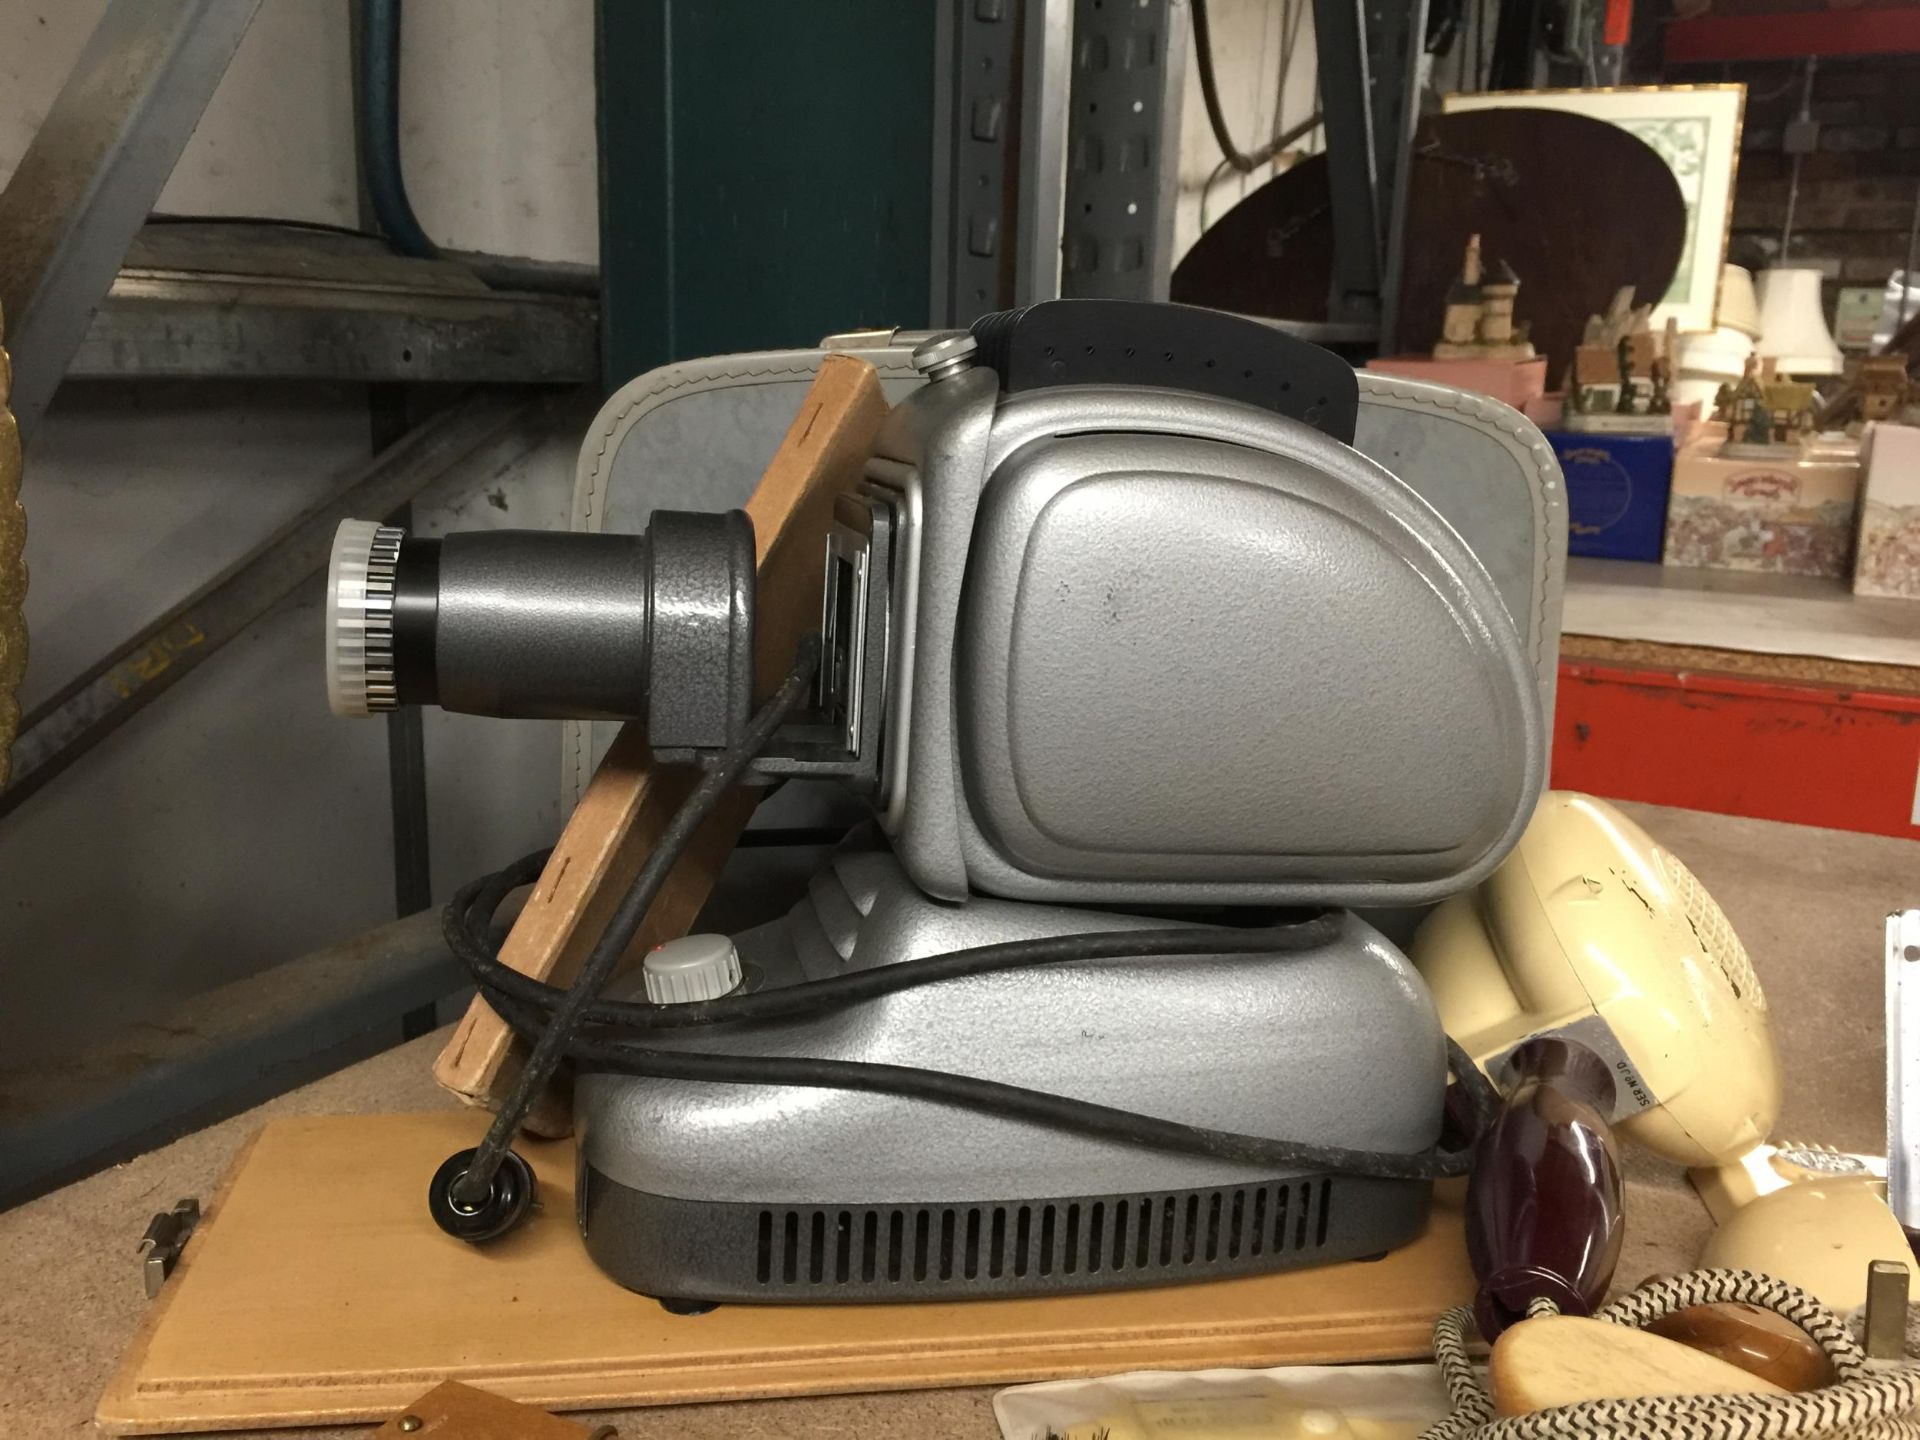 A VINTAGE PLANK PROJECTOR IN CASE, HMV HAIRDRYER AND STAND, BRUSHES, ETC - Image 2 of 3